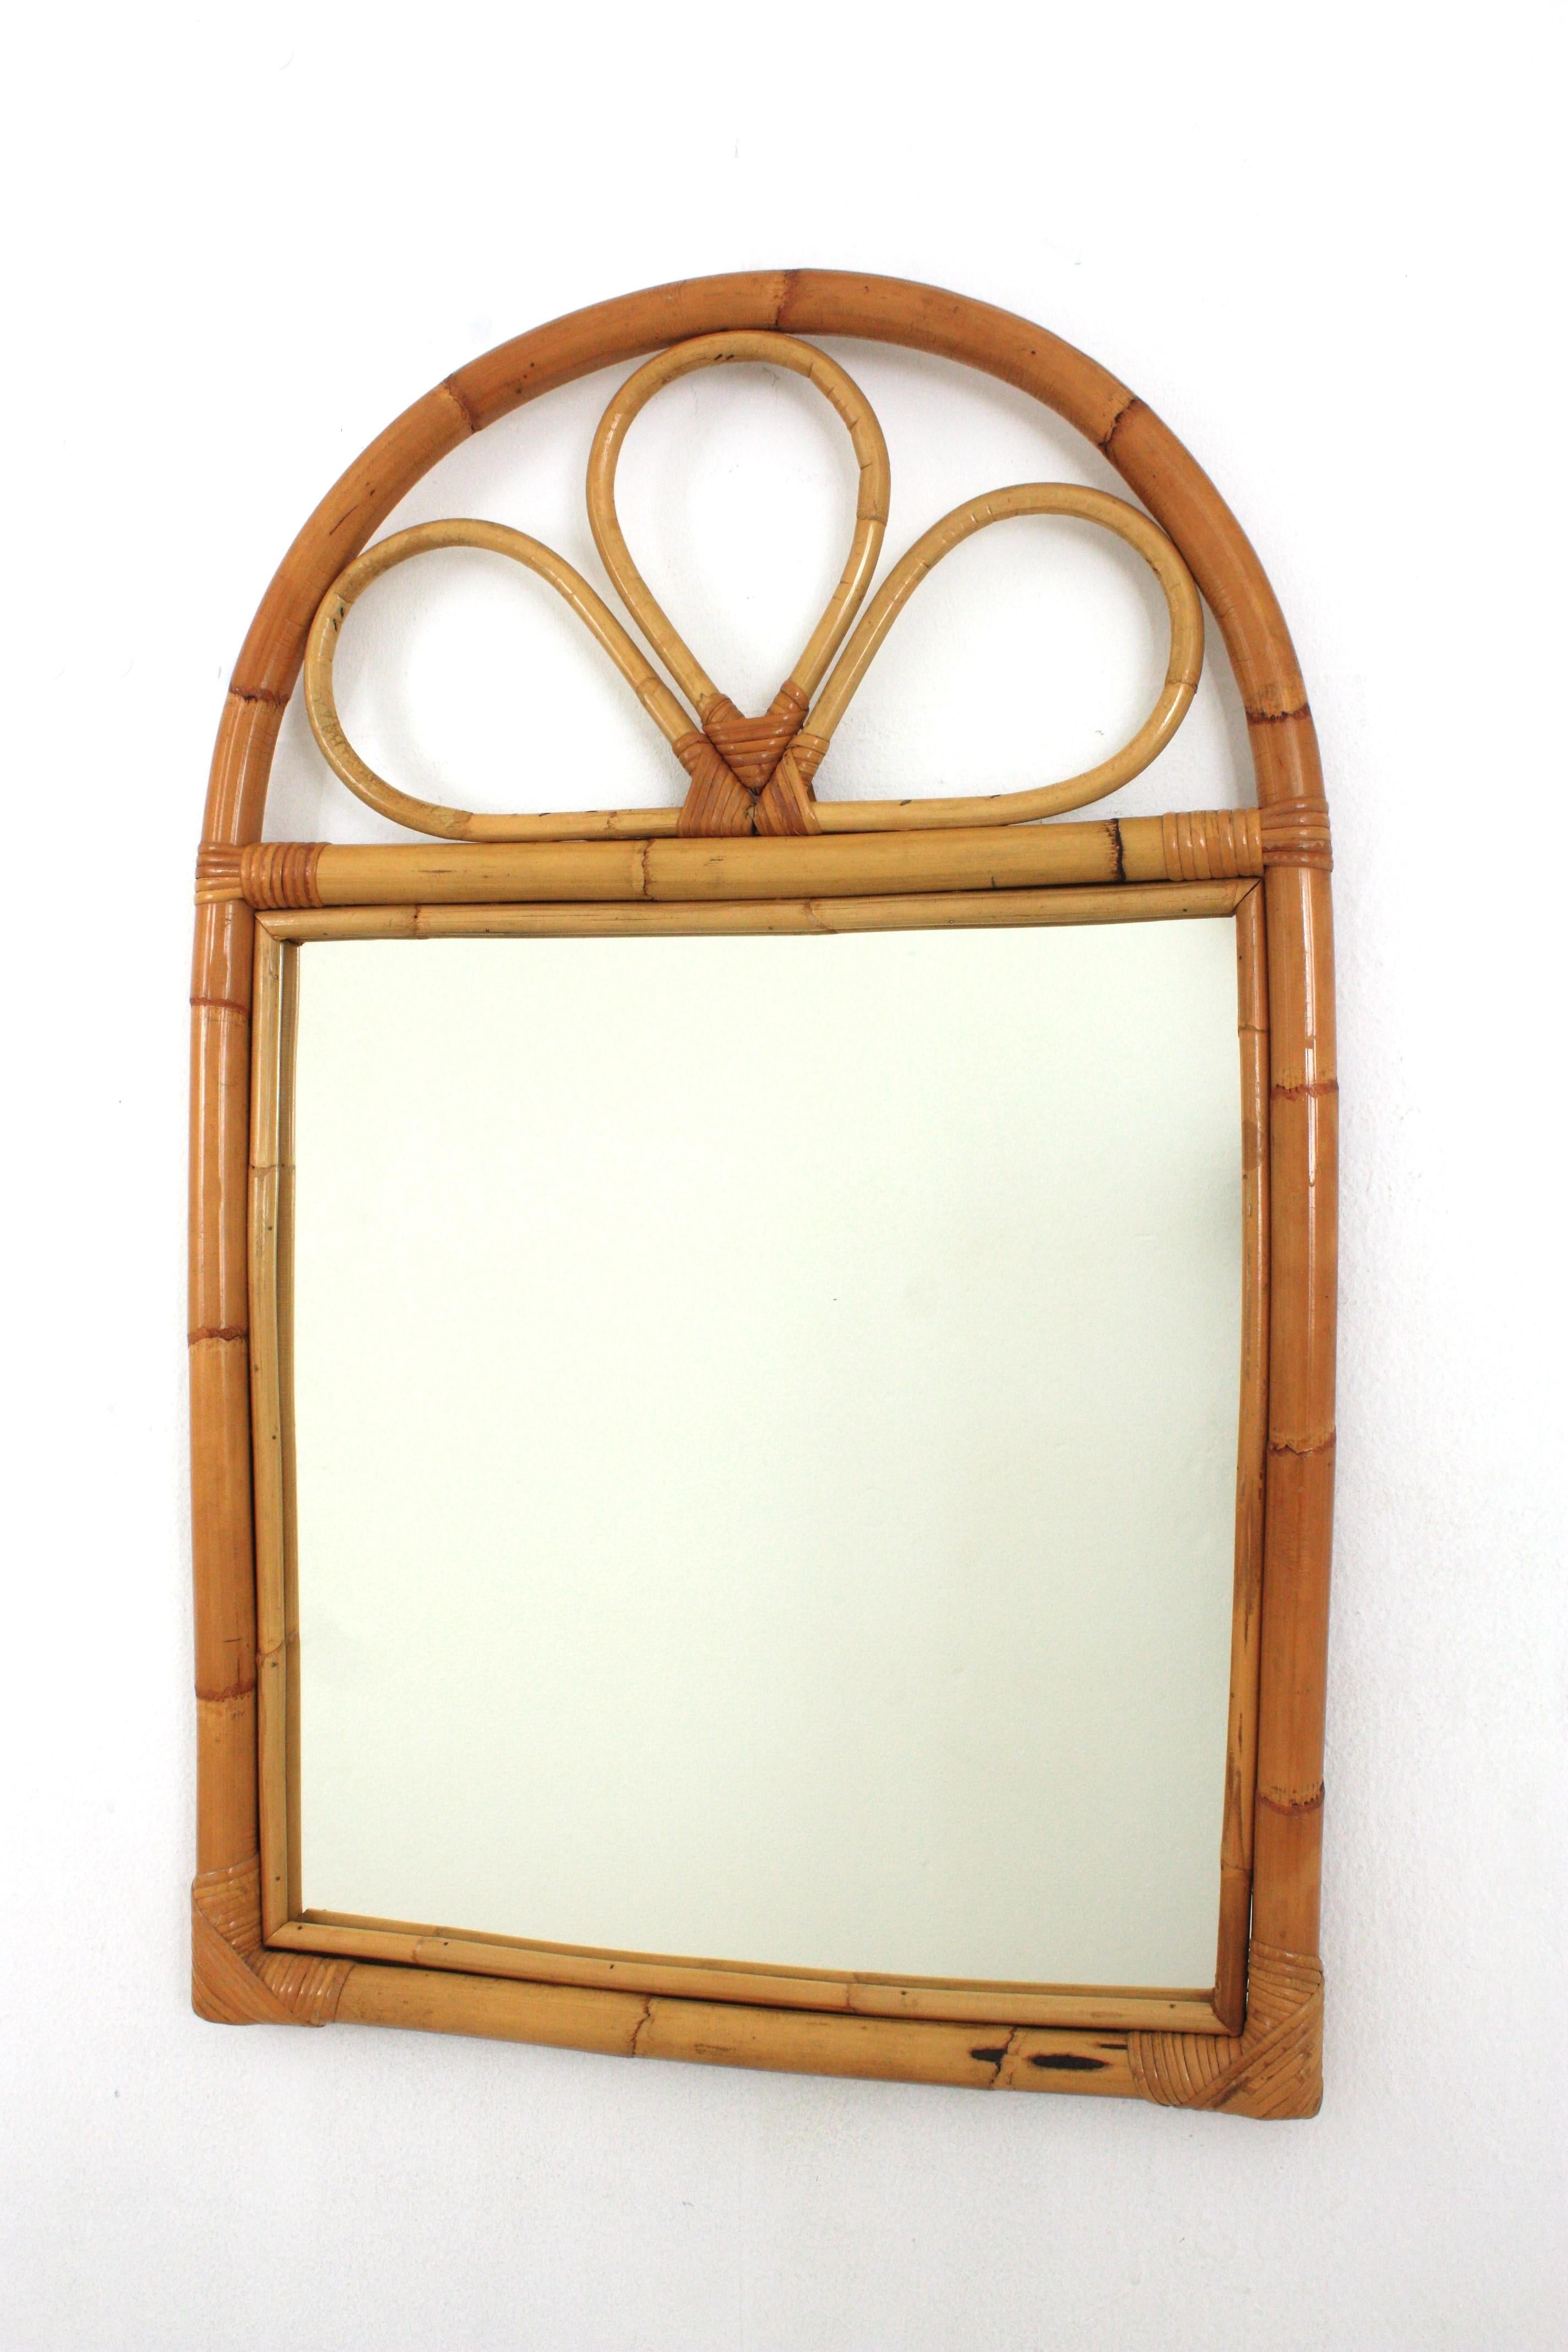 Spanish Rattan Bamboo Mirror with Arched Top, 1960s For Sale 2